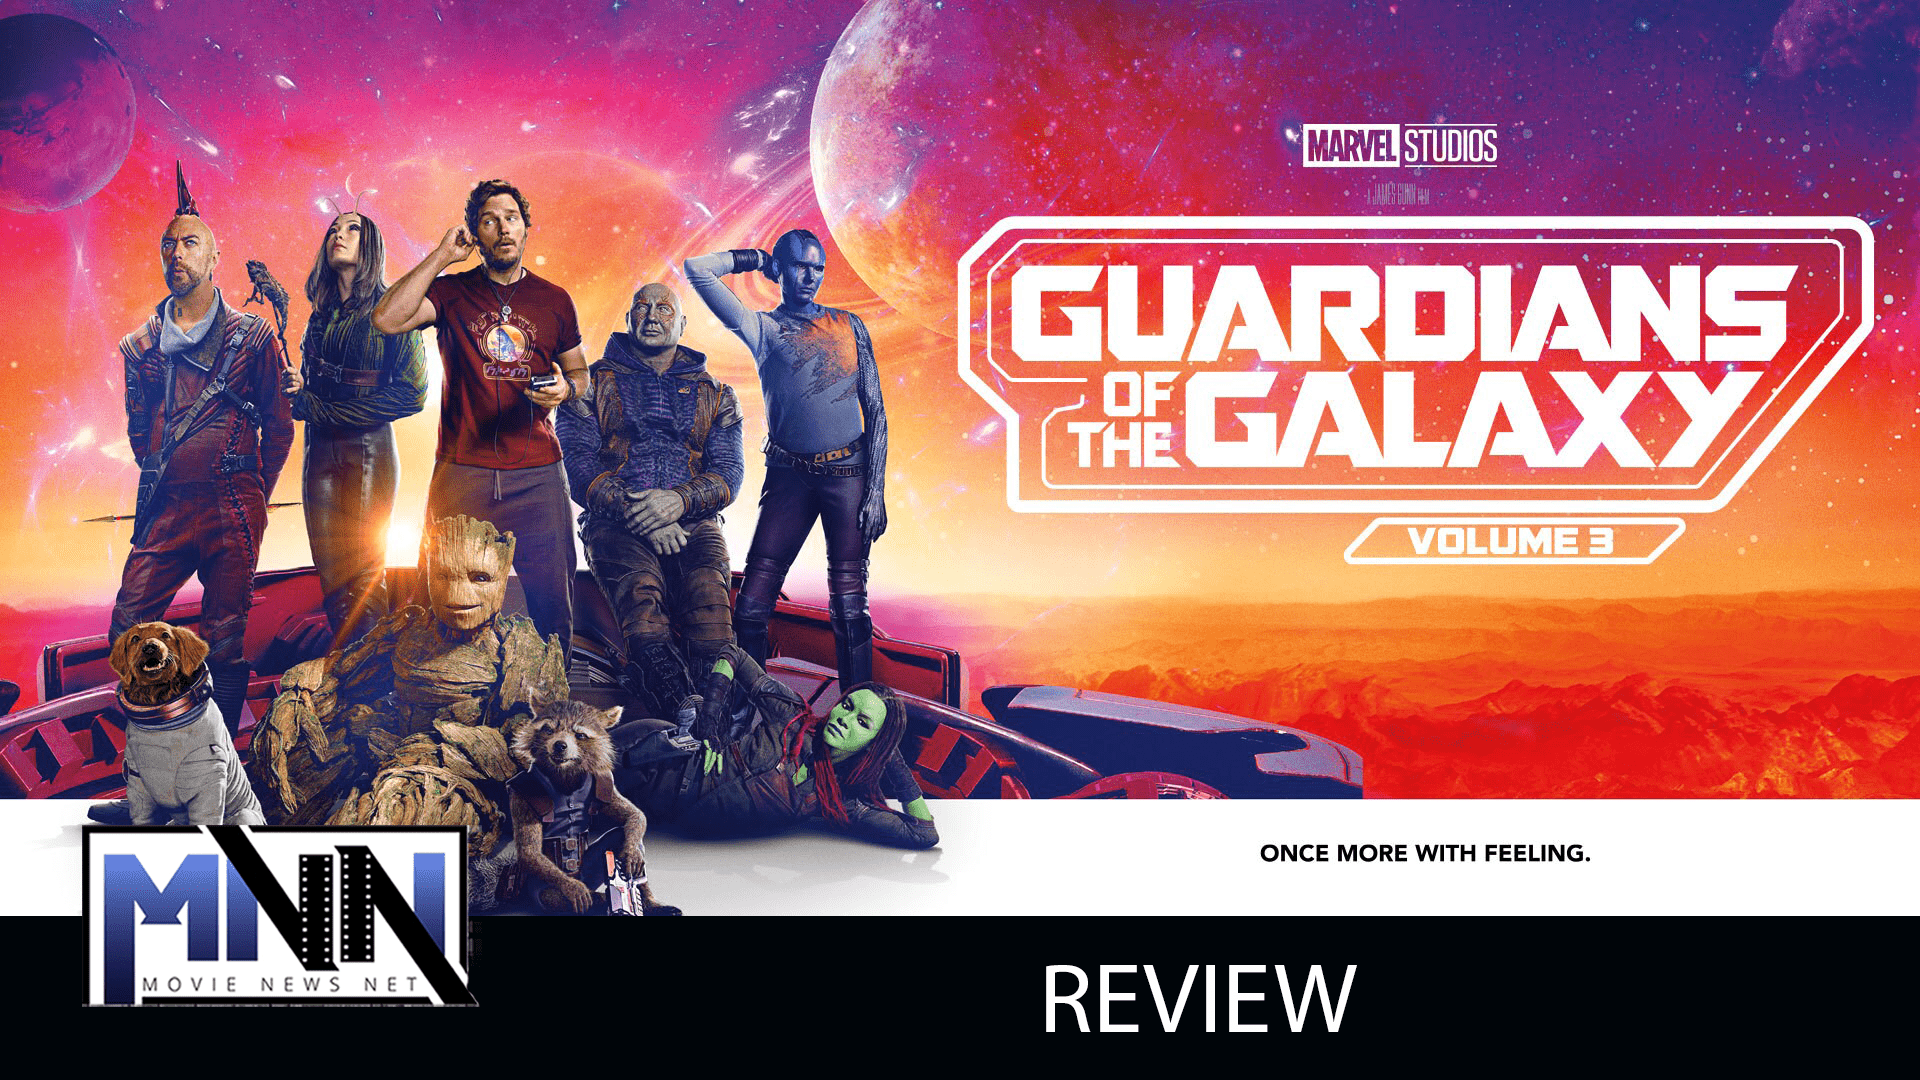 GUARDIANS OF THE GALAXY VOL. 3 - Review